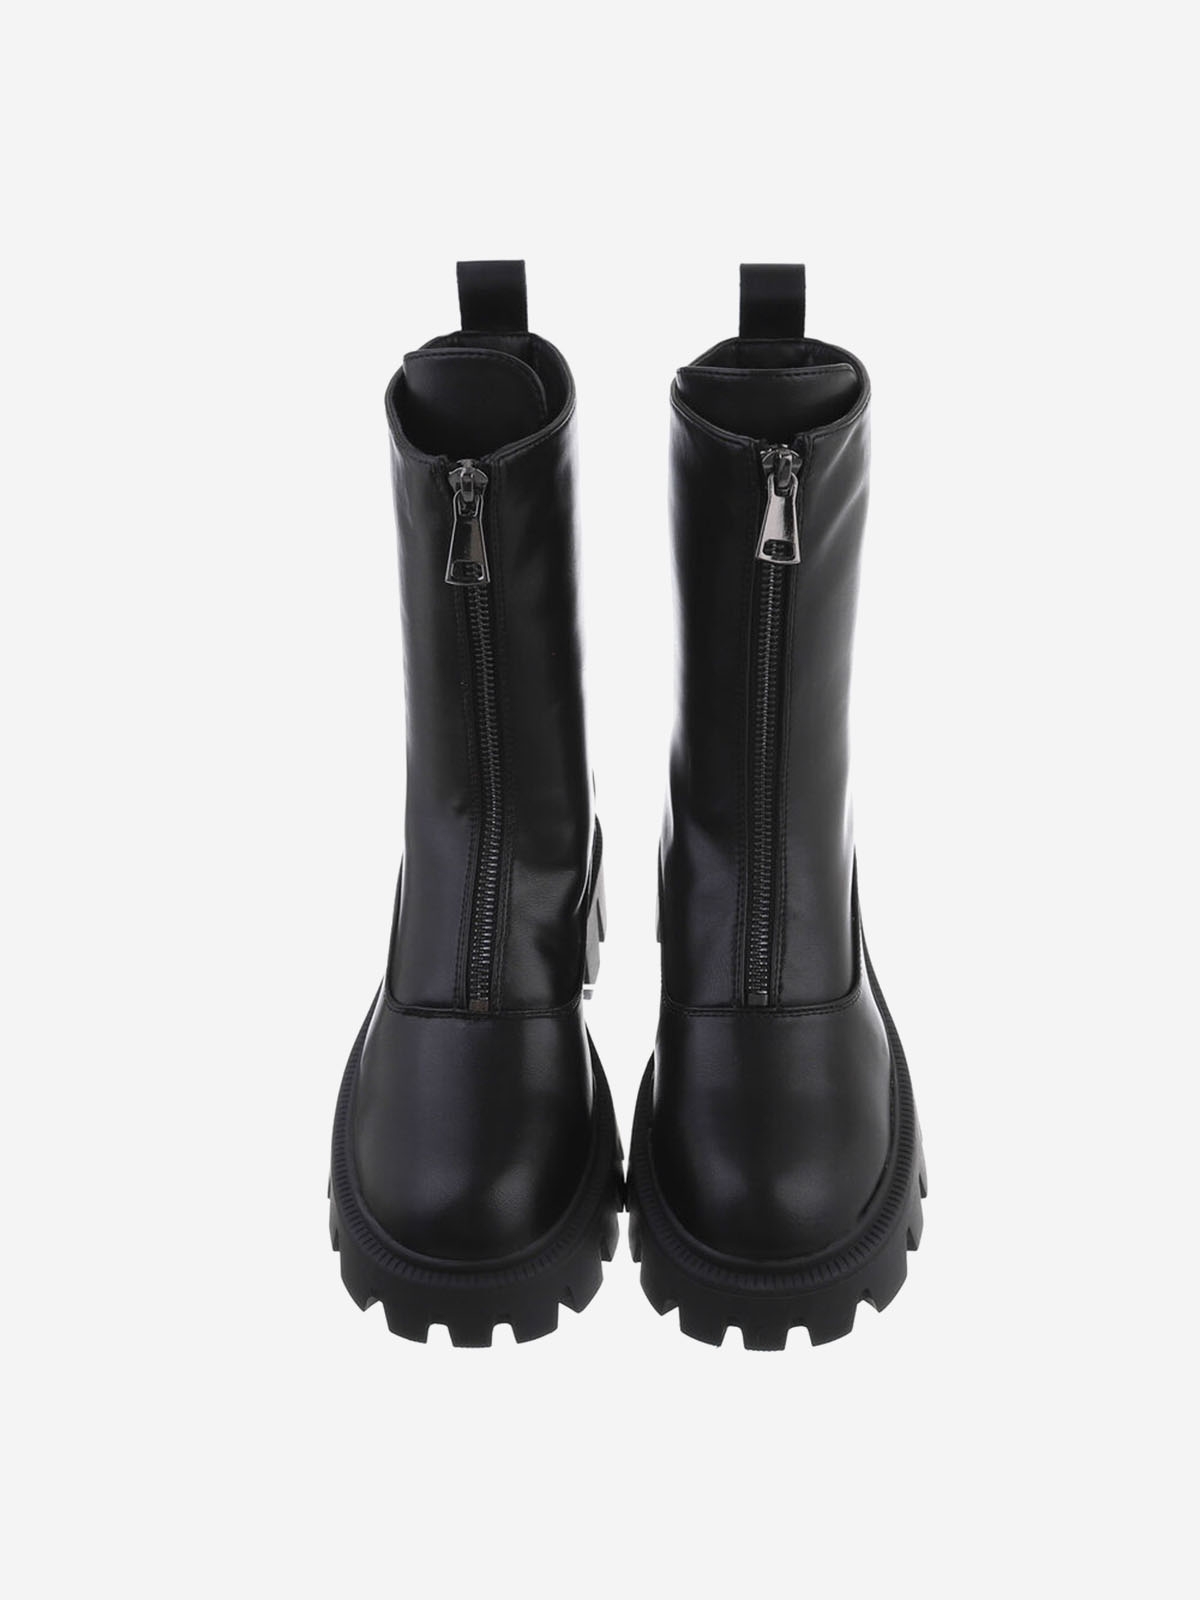 Women's ankle boots with a zipper in the front in black